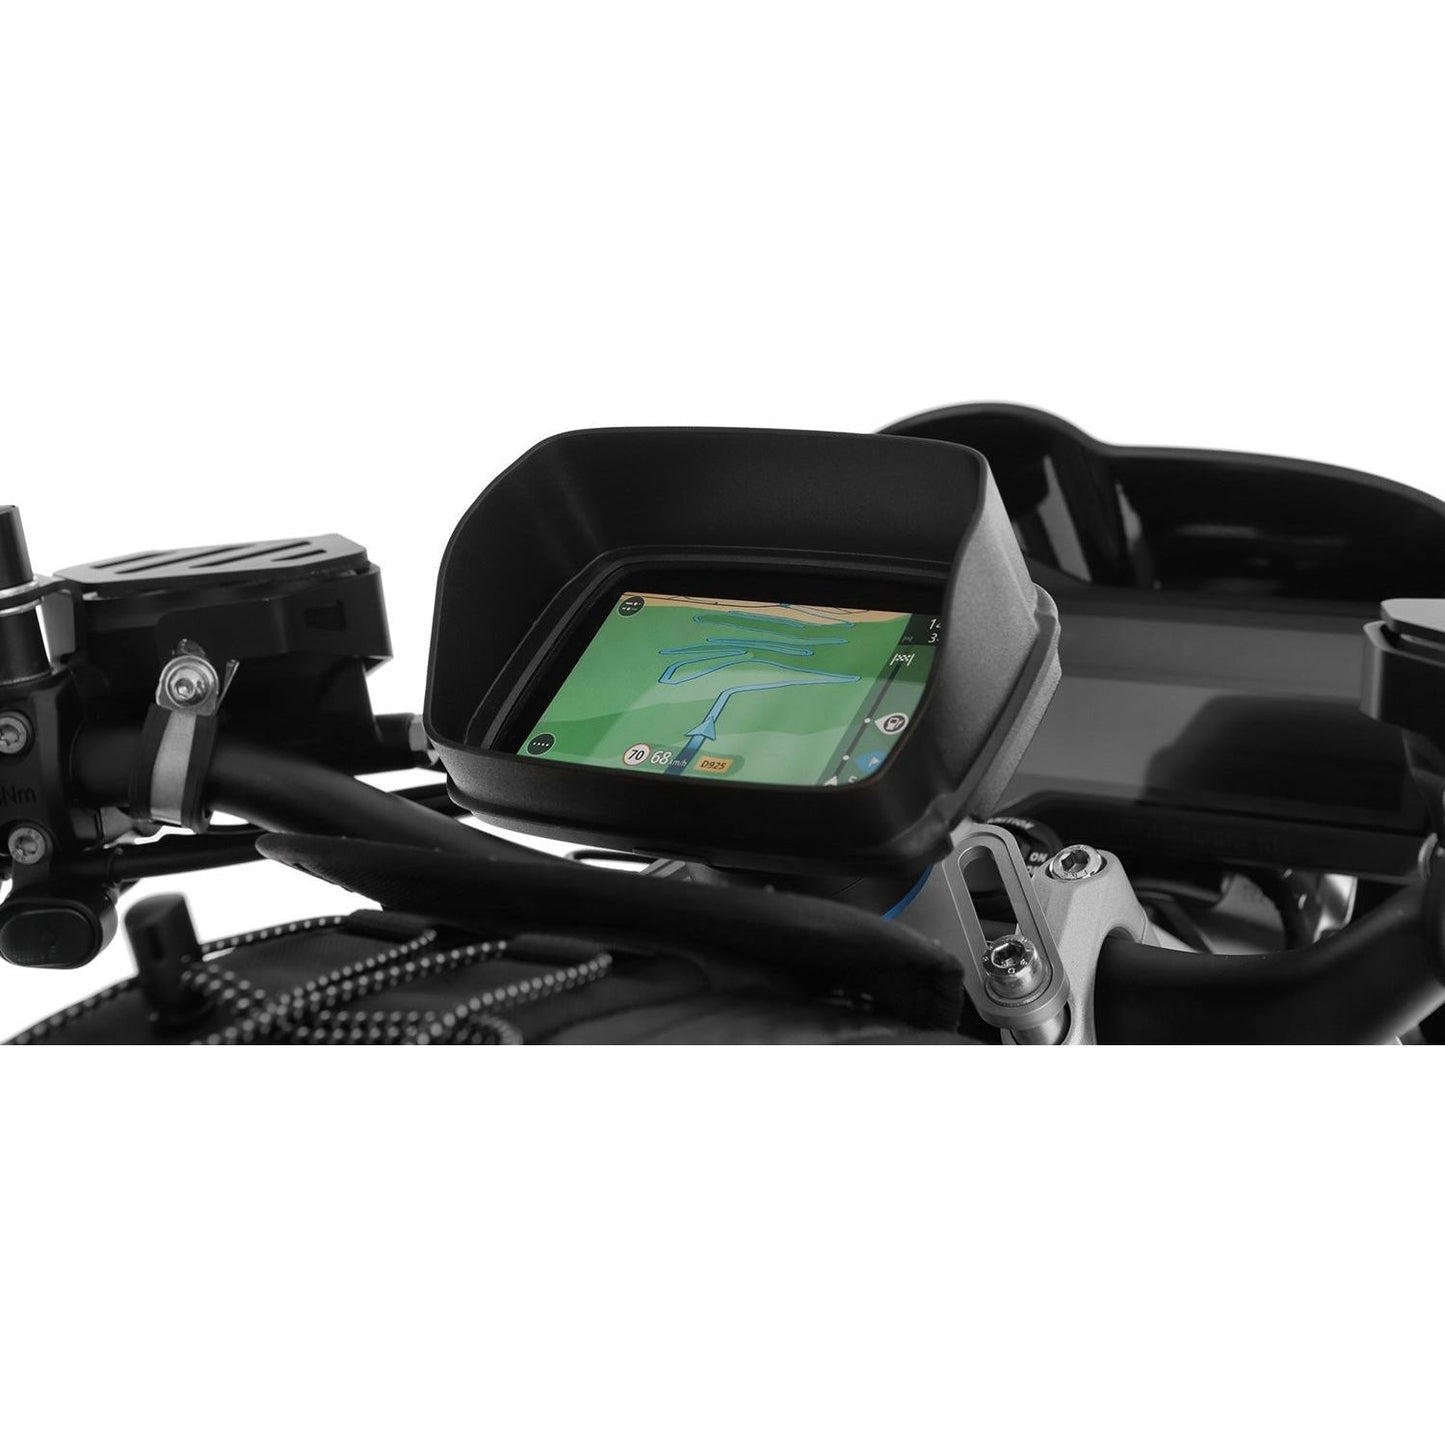 Wunderlich visière protectrice noire pour TomTom Rider (21071-002) - EdTools